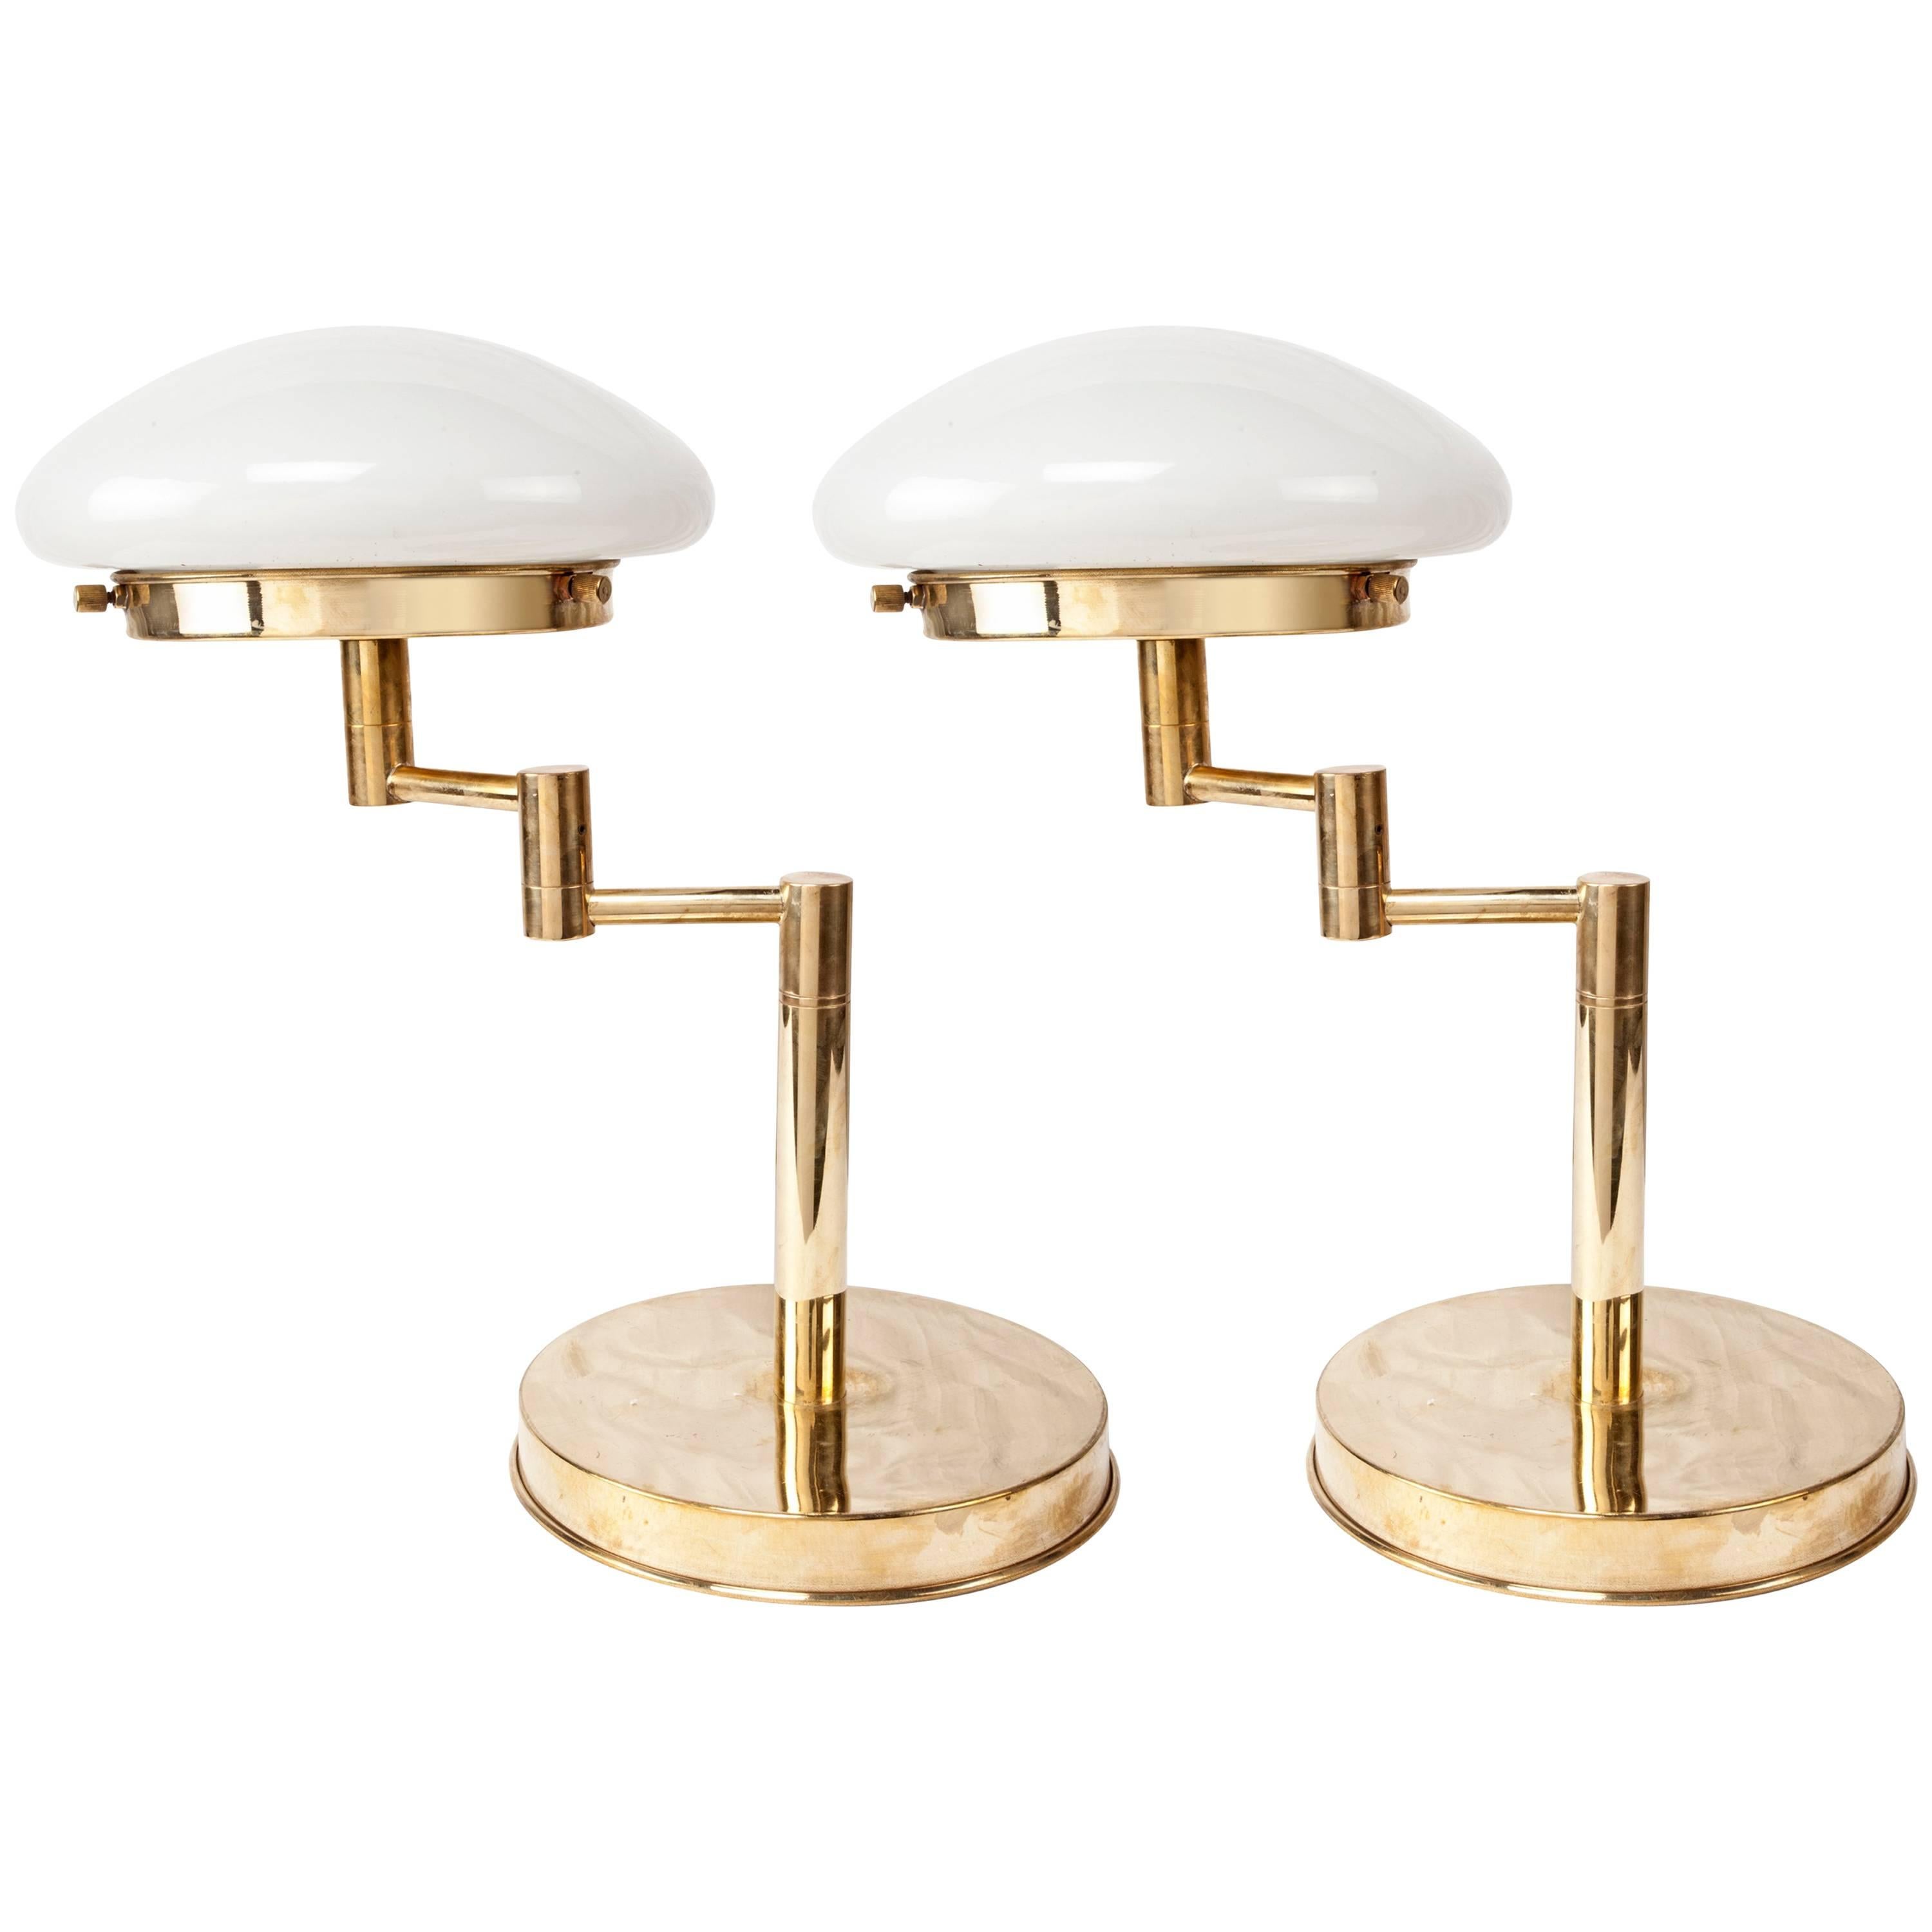 Pair of Mid-Century Modern Adjustable Brass Table Lamps with Milk Glass Shades